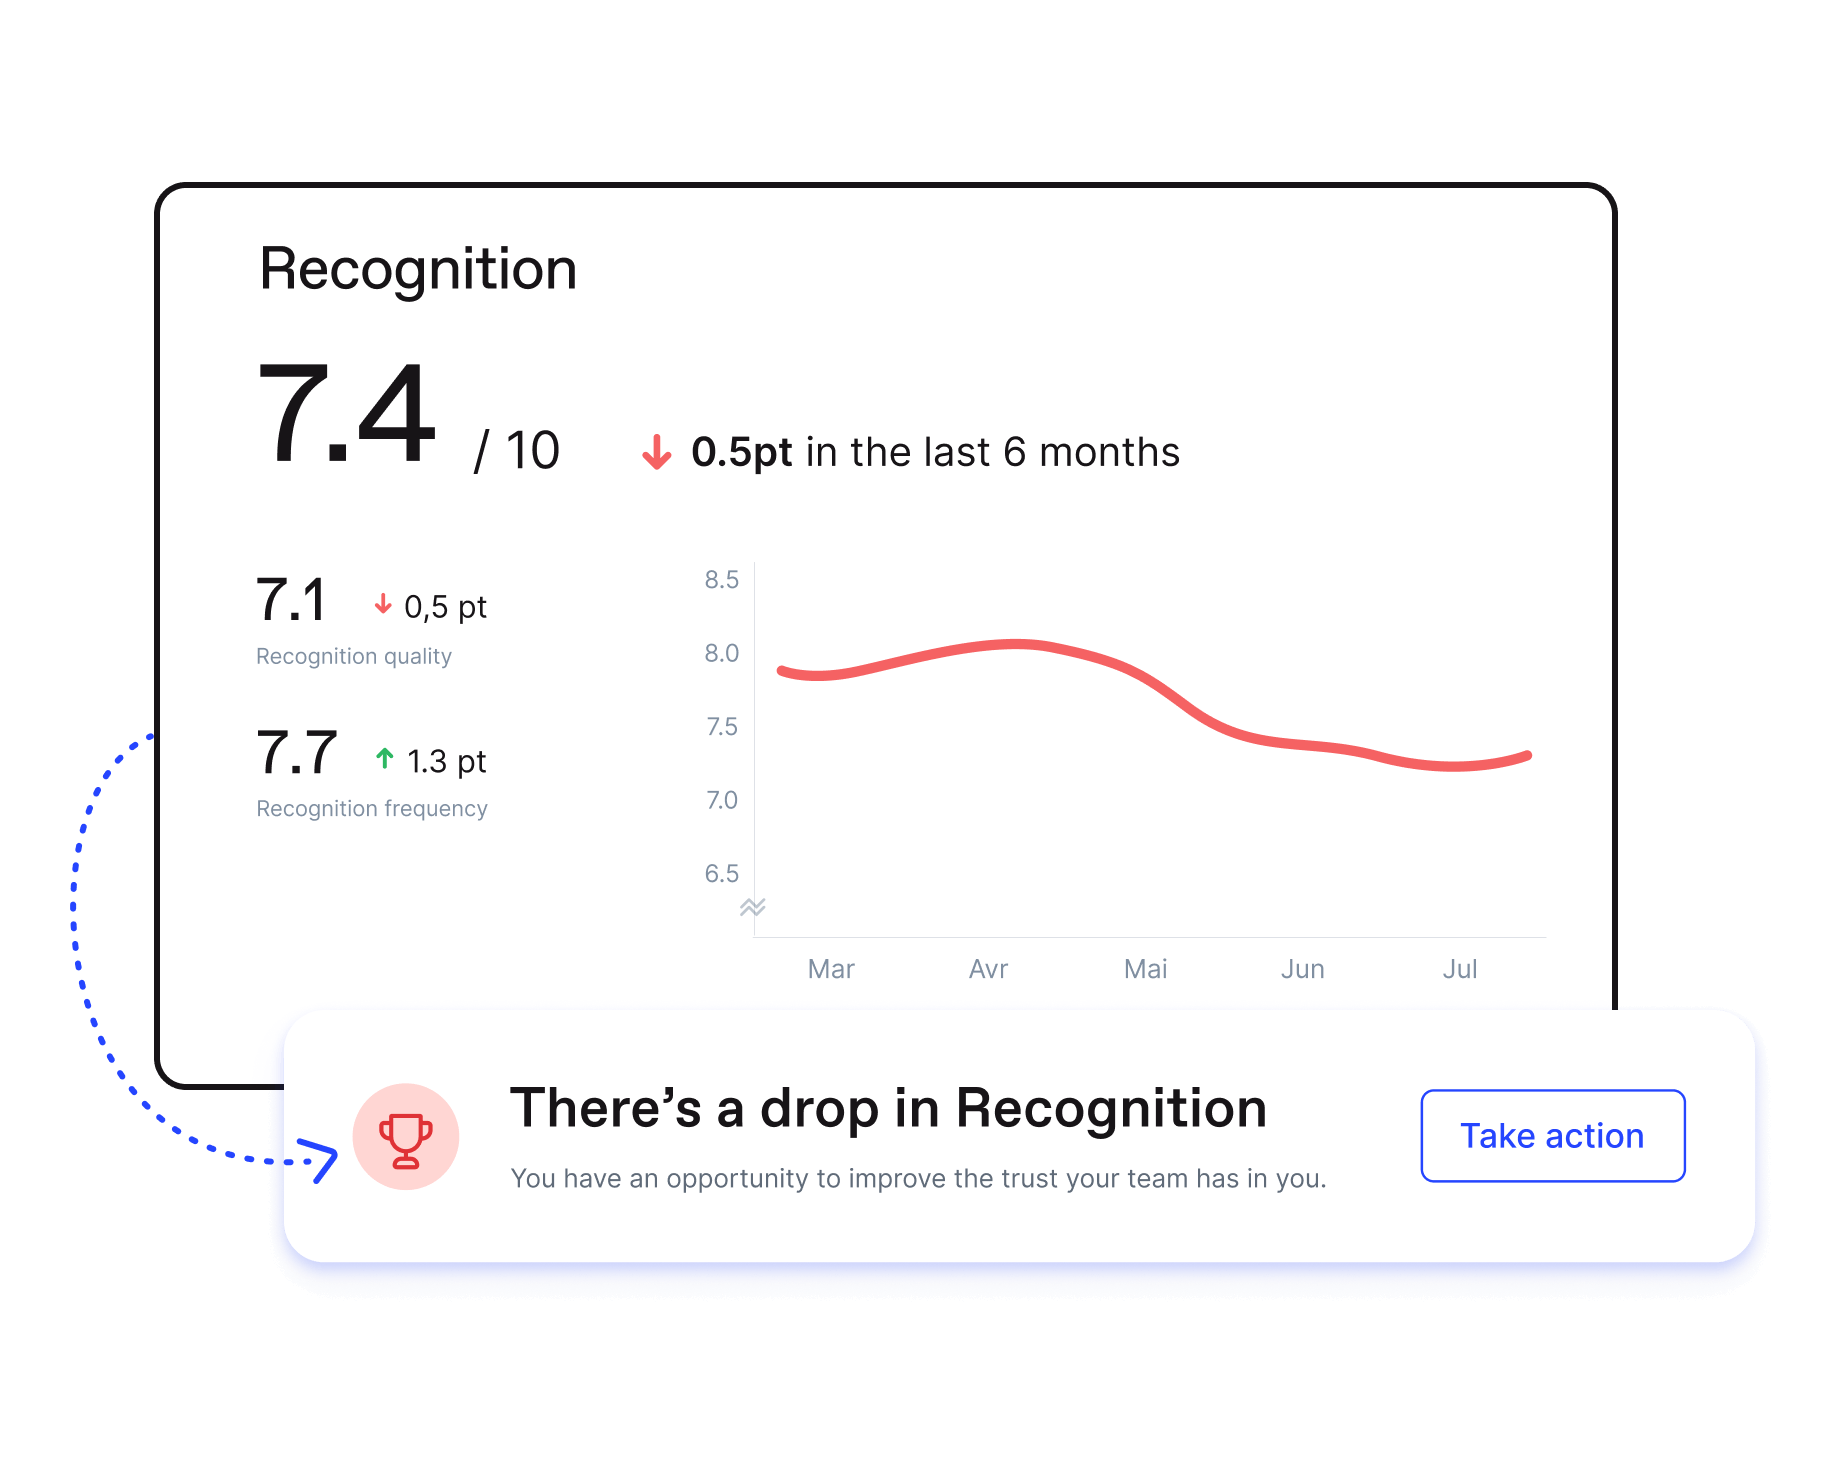 A report on recognition which shows a drop of 0.5 points over the last 6 months.